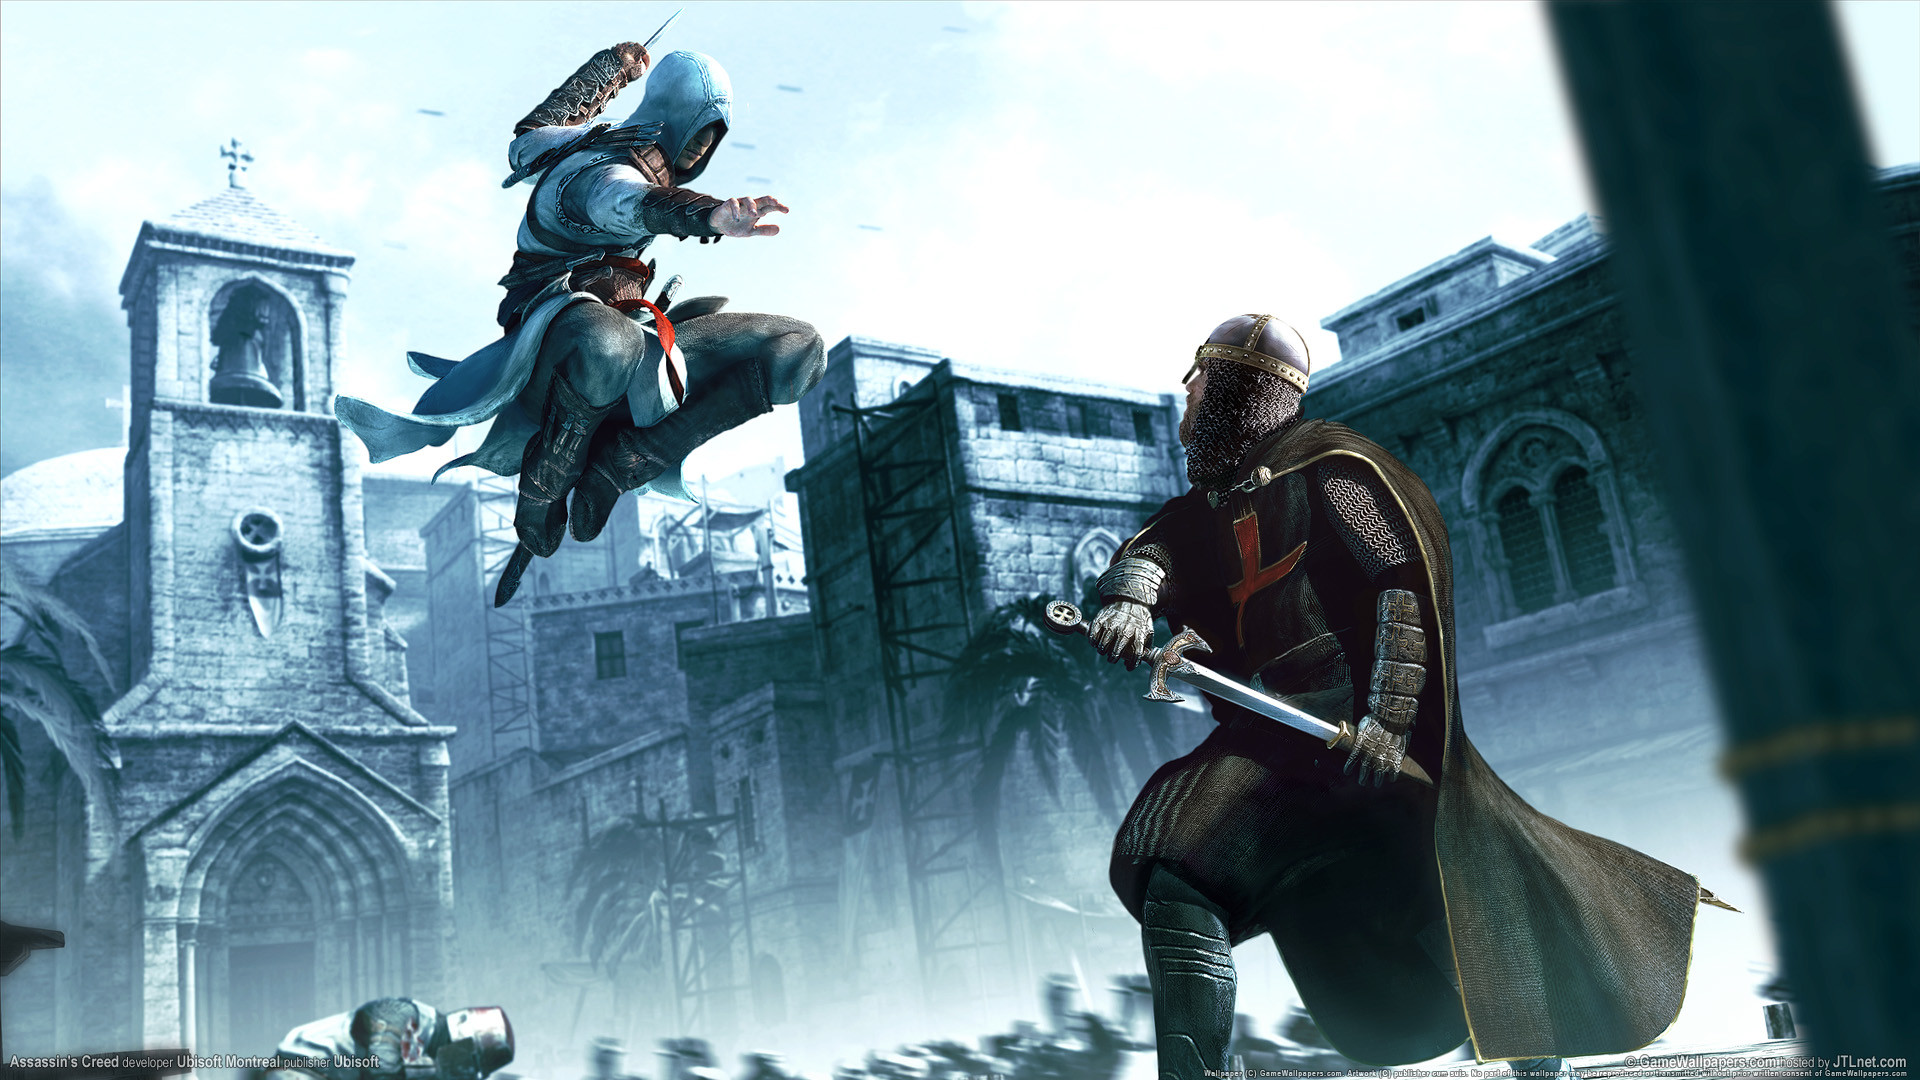 1920x1080 Download Assassins Creed Wallpaper Games HD pictures in high .